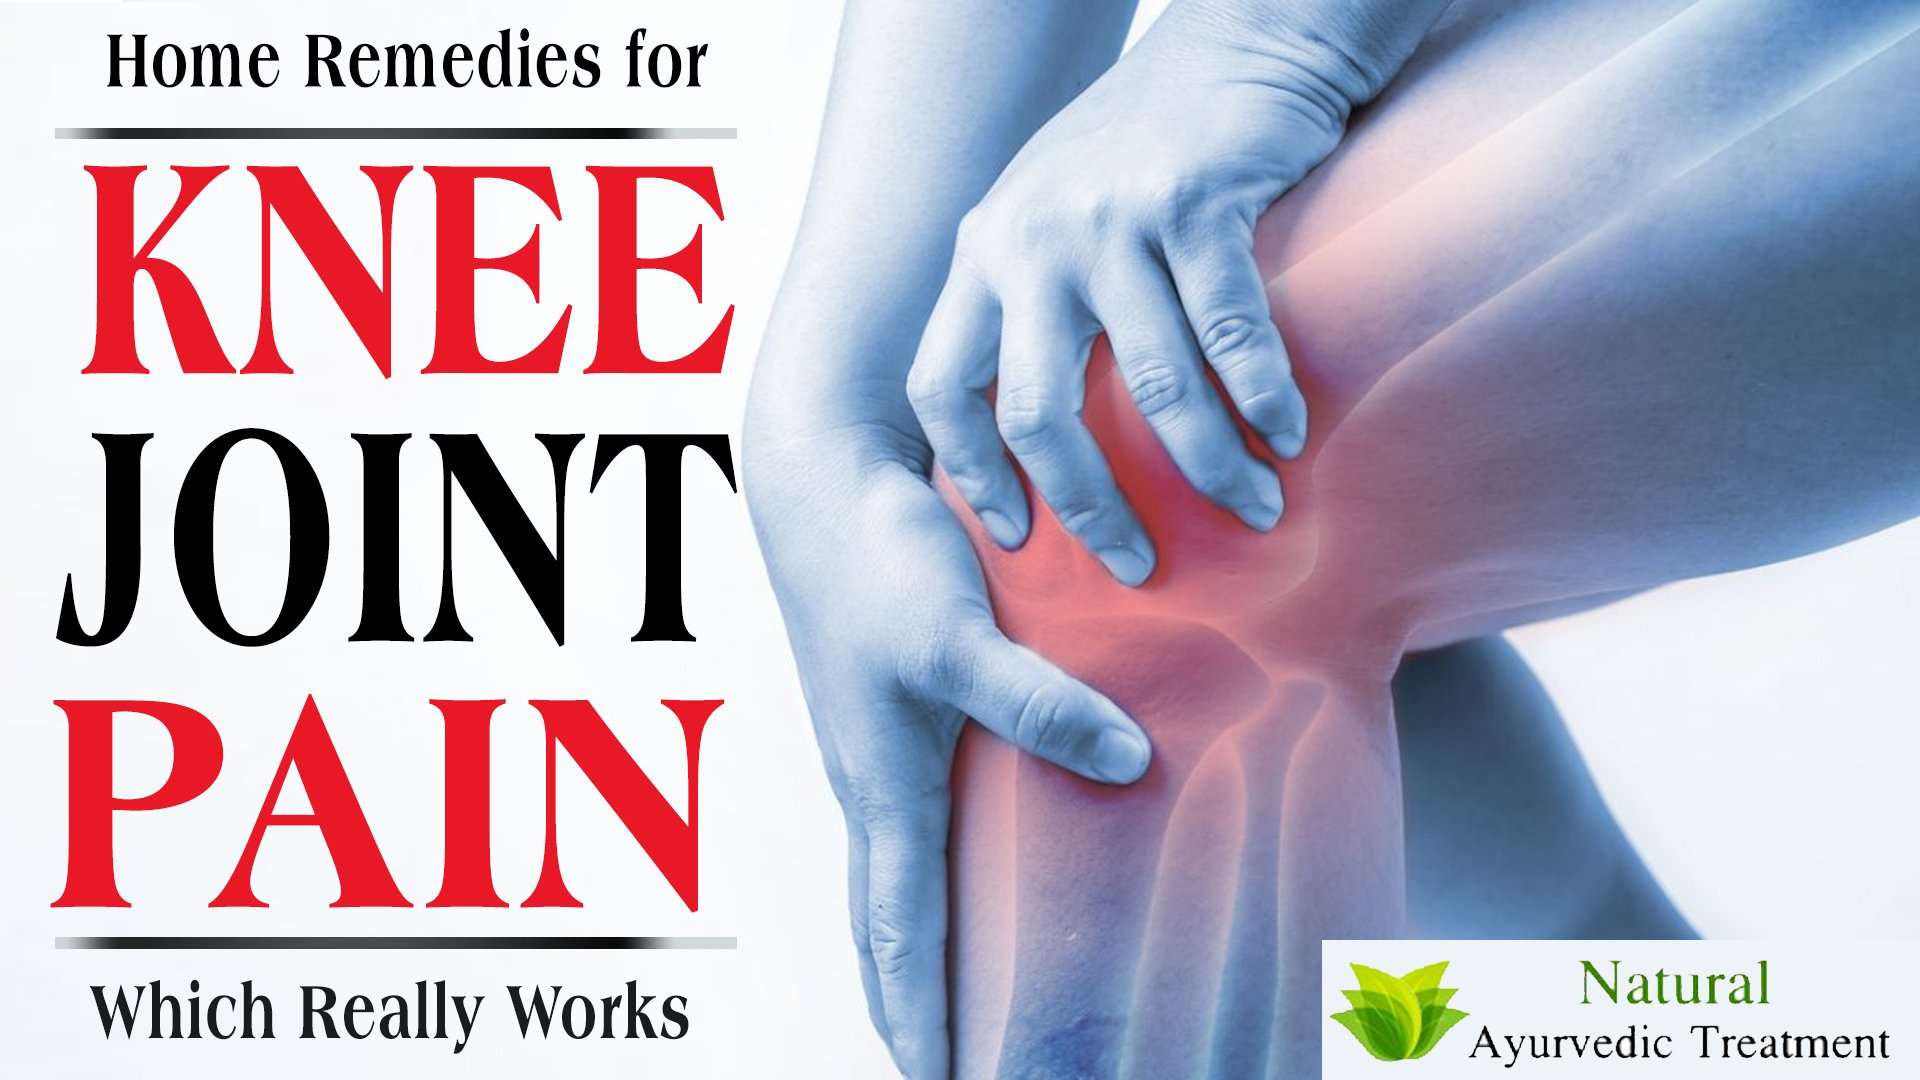 Top 6 Home Remedies for Knee Joint Pain Which Really Works